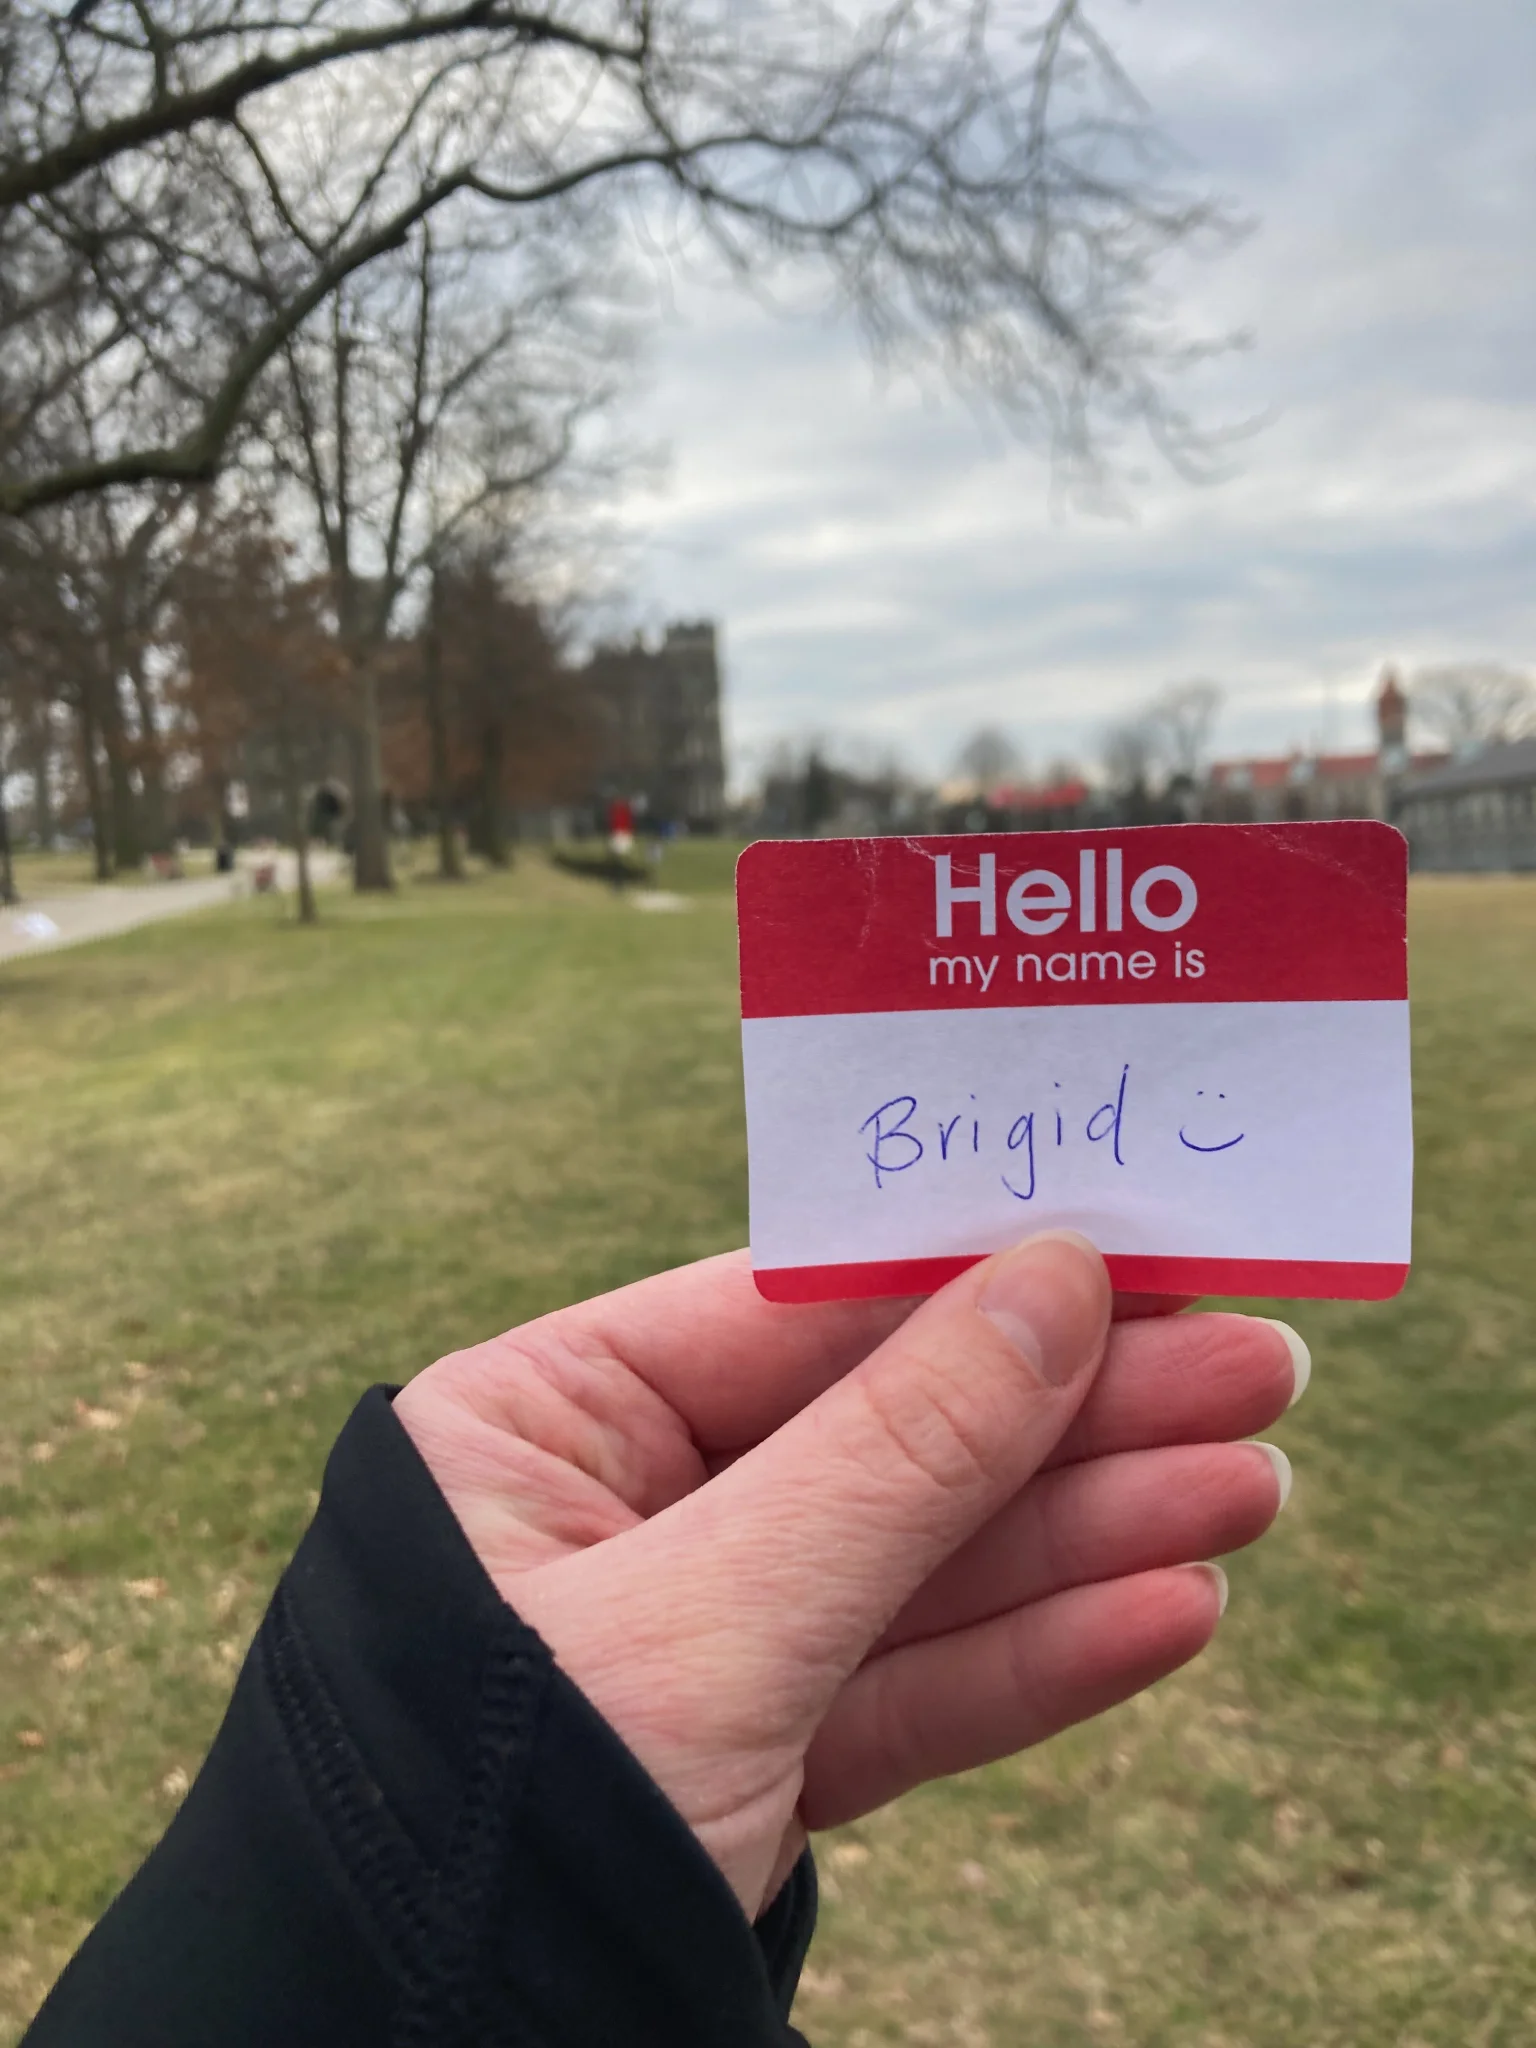 A name tag held in front of Haber Green that says "Hello my name is Brigid"